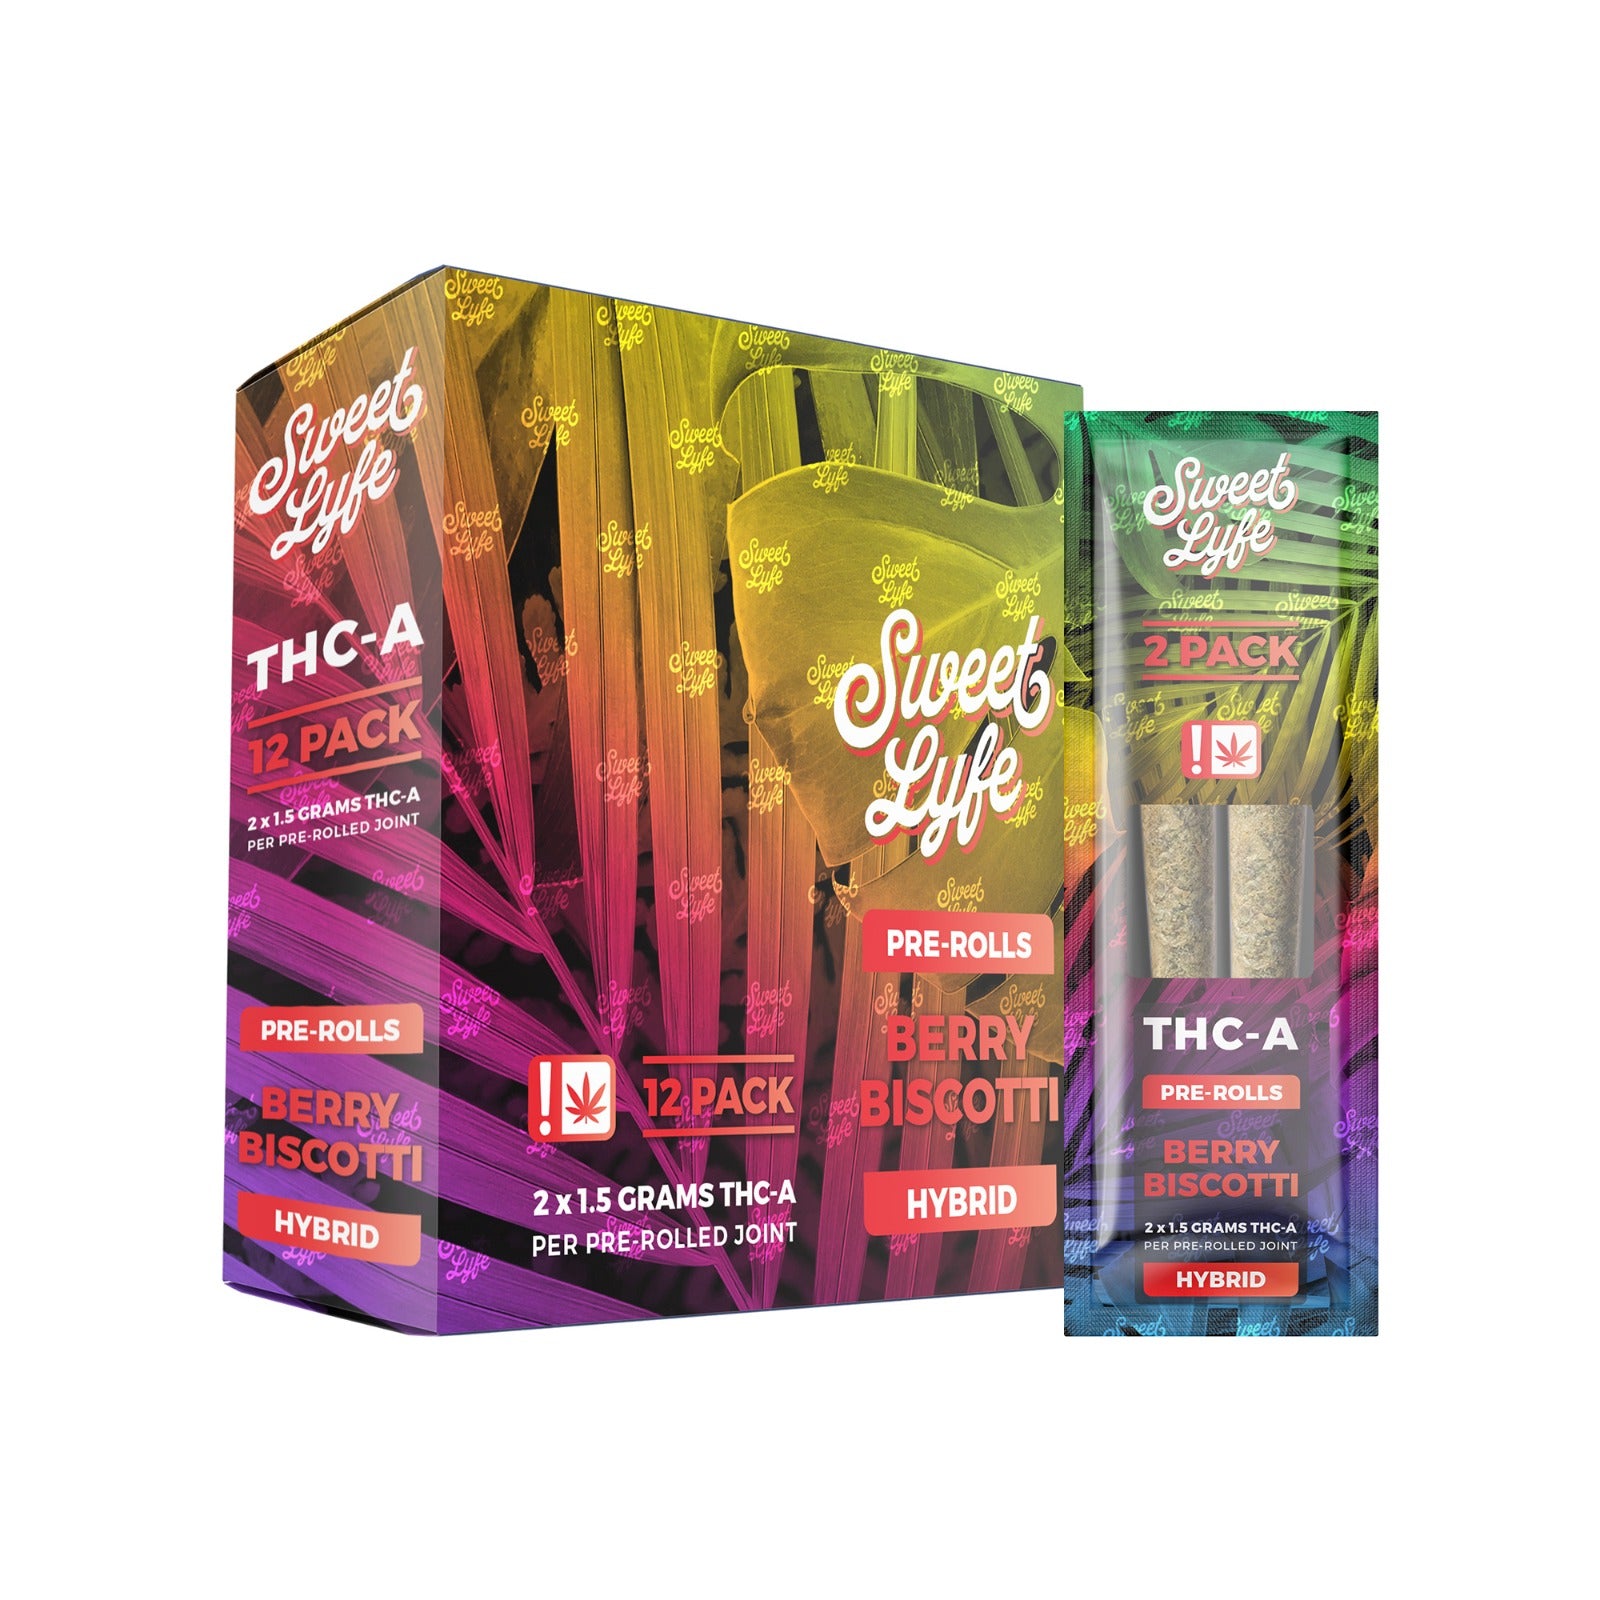 2 Pack Pre-Rolls Joint THC-A|Berry Biscotti - Hybrid